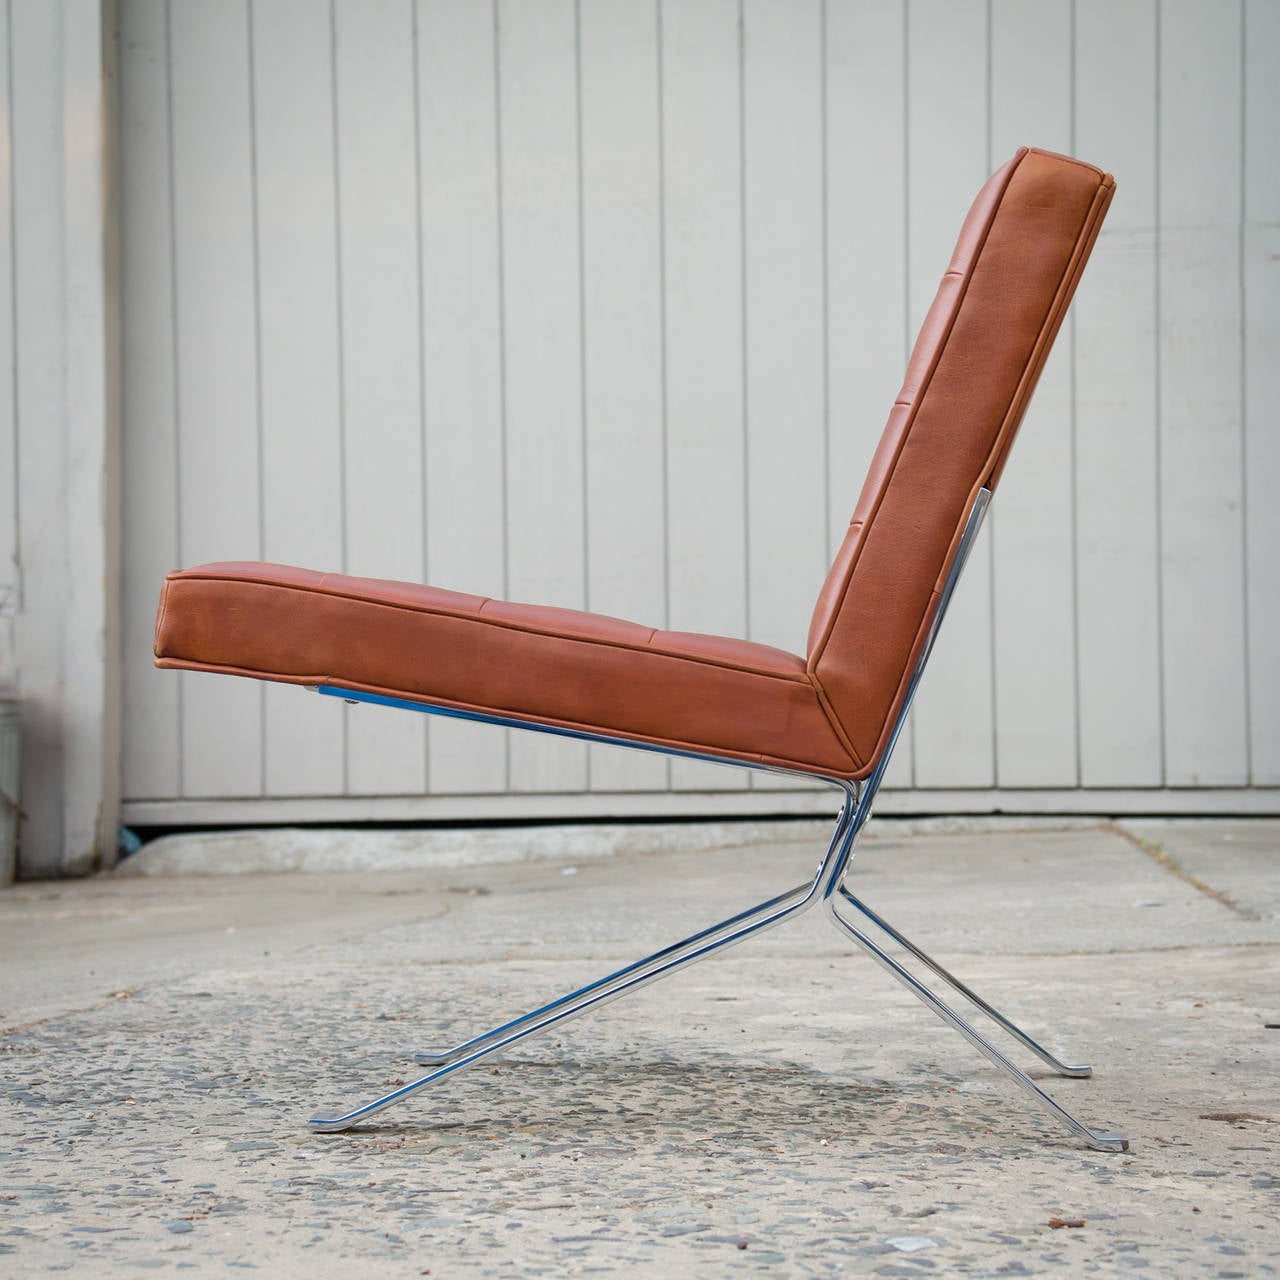 Mid-20th Century Vintage Leather Lounge Chairs by the U.S. Royal Metal Corporation